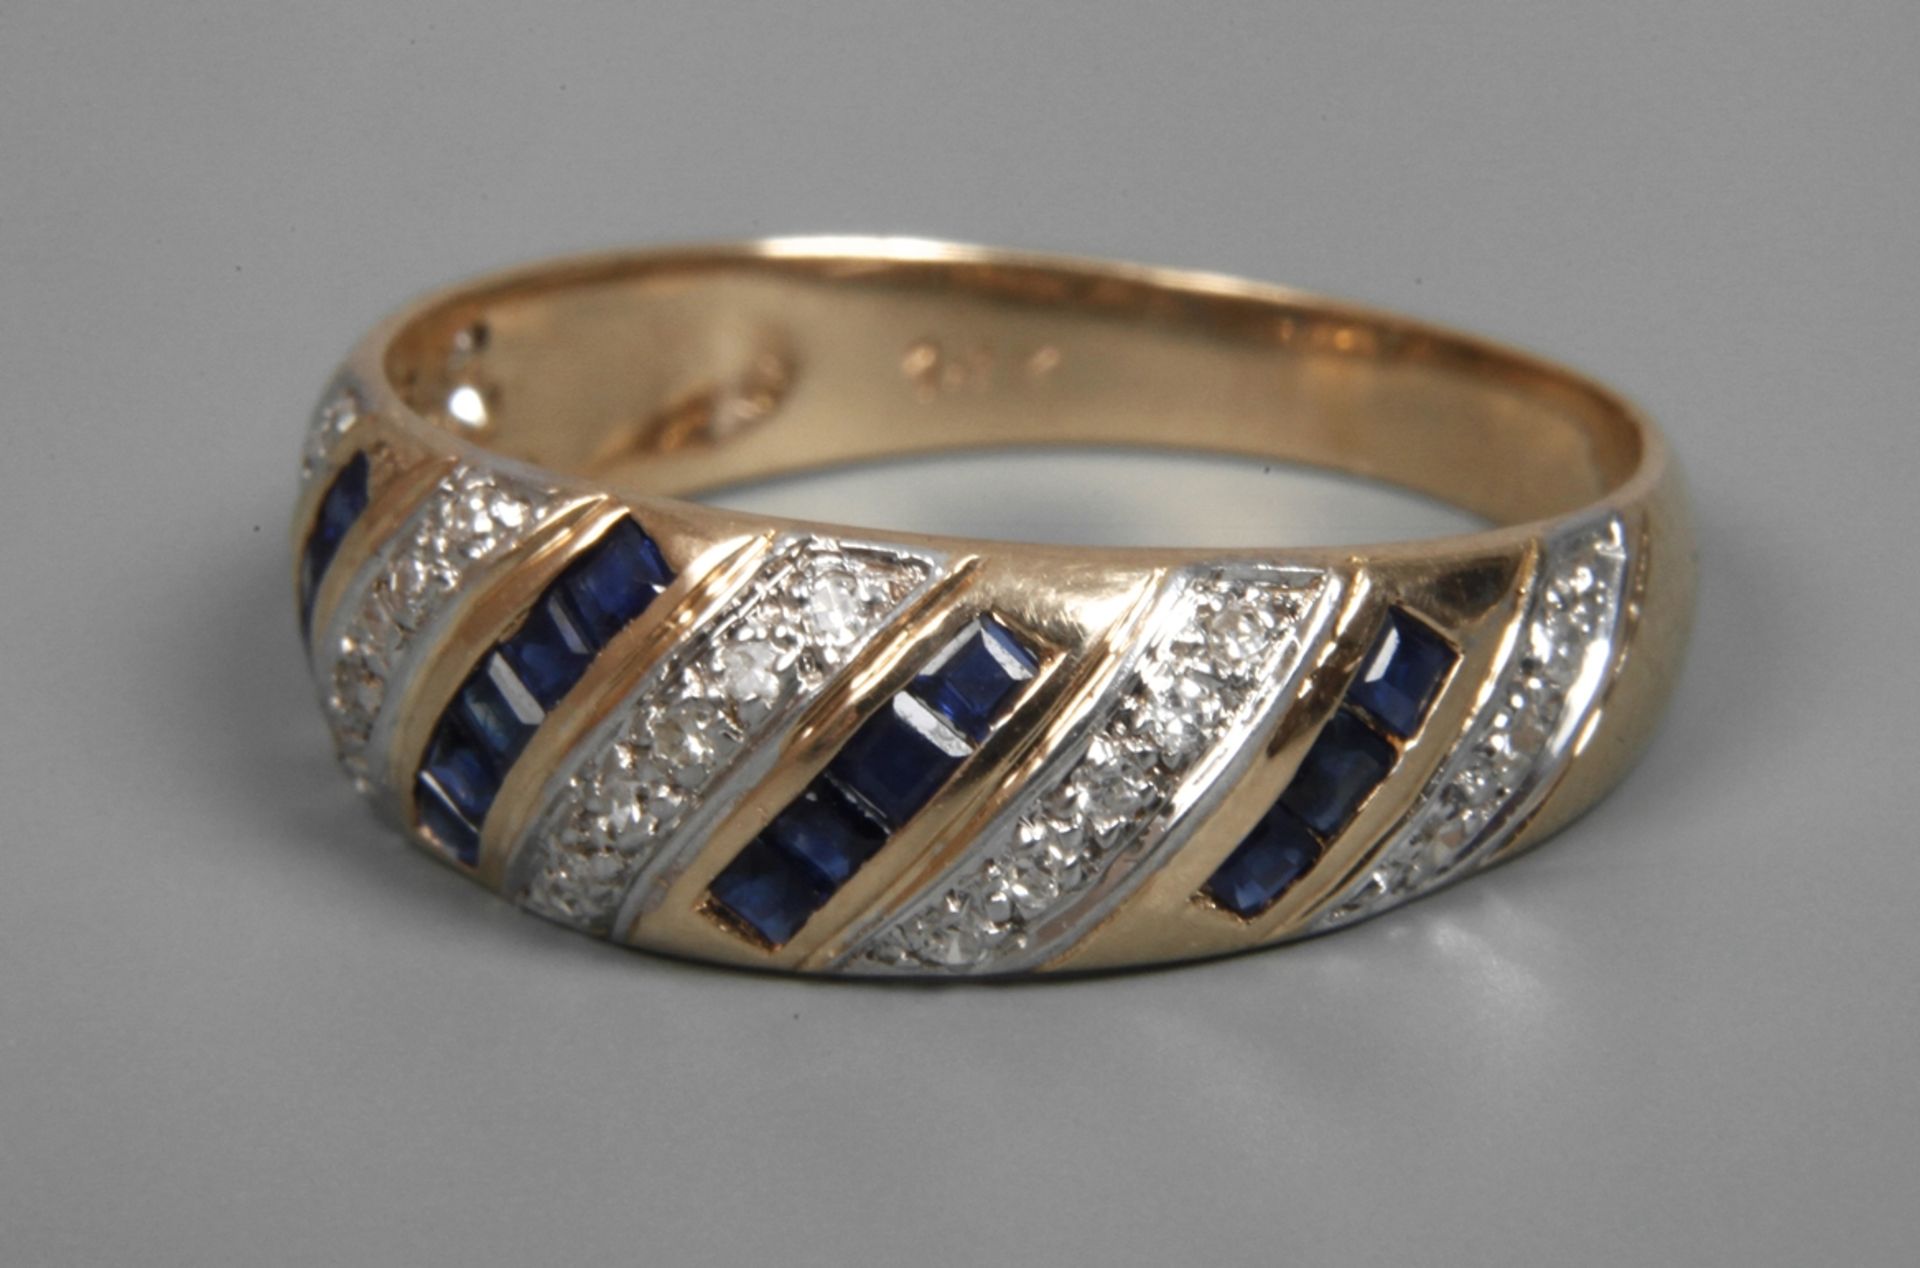 Lady's ring with sapphire and diamond